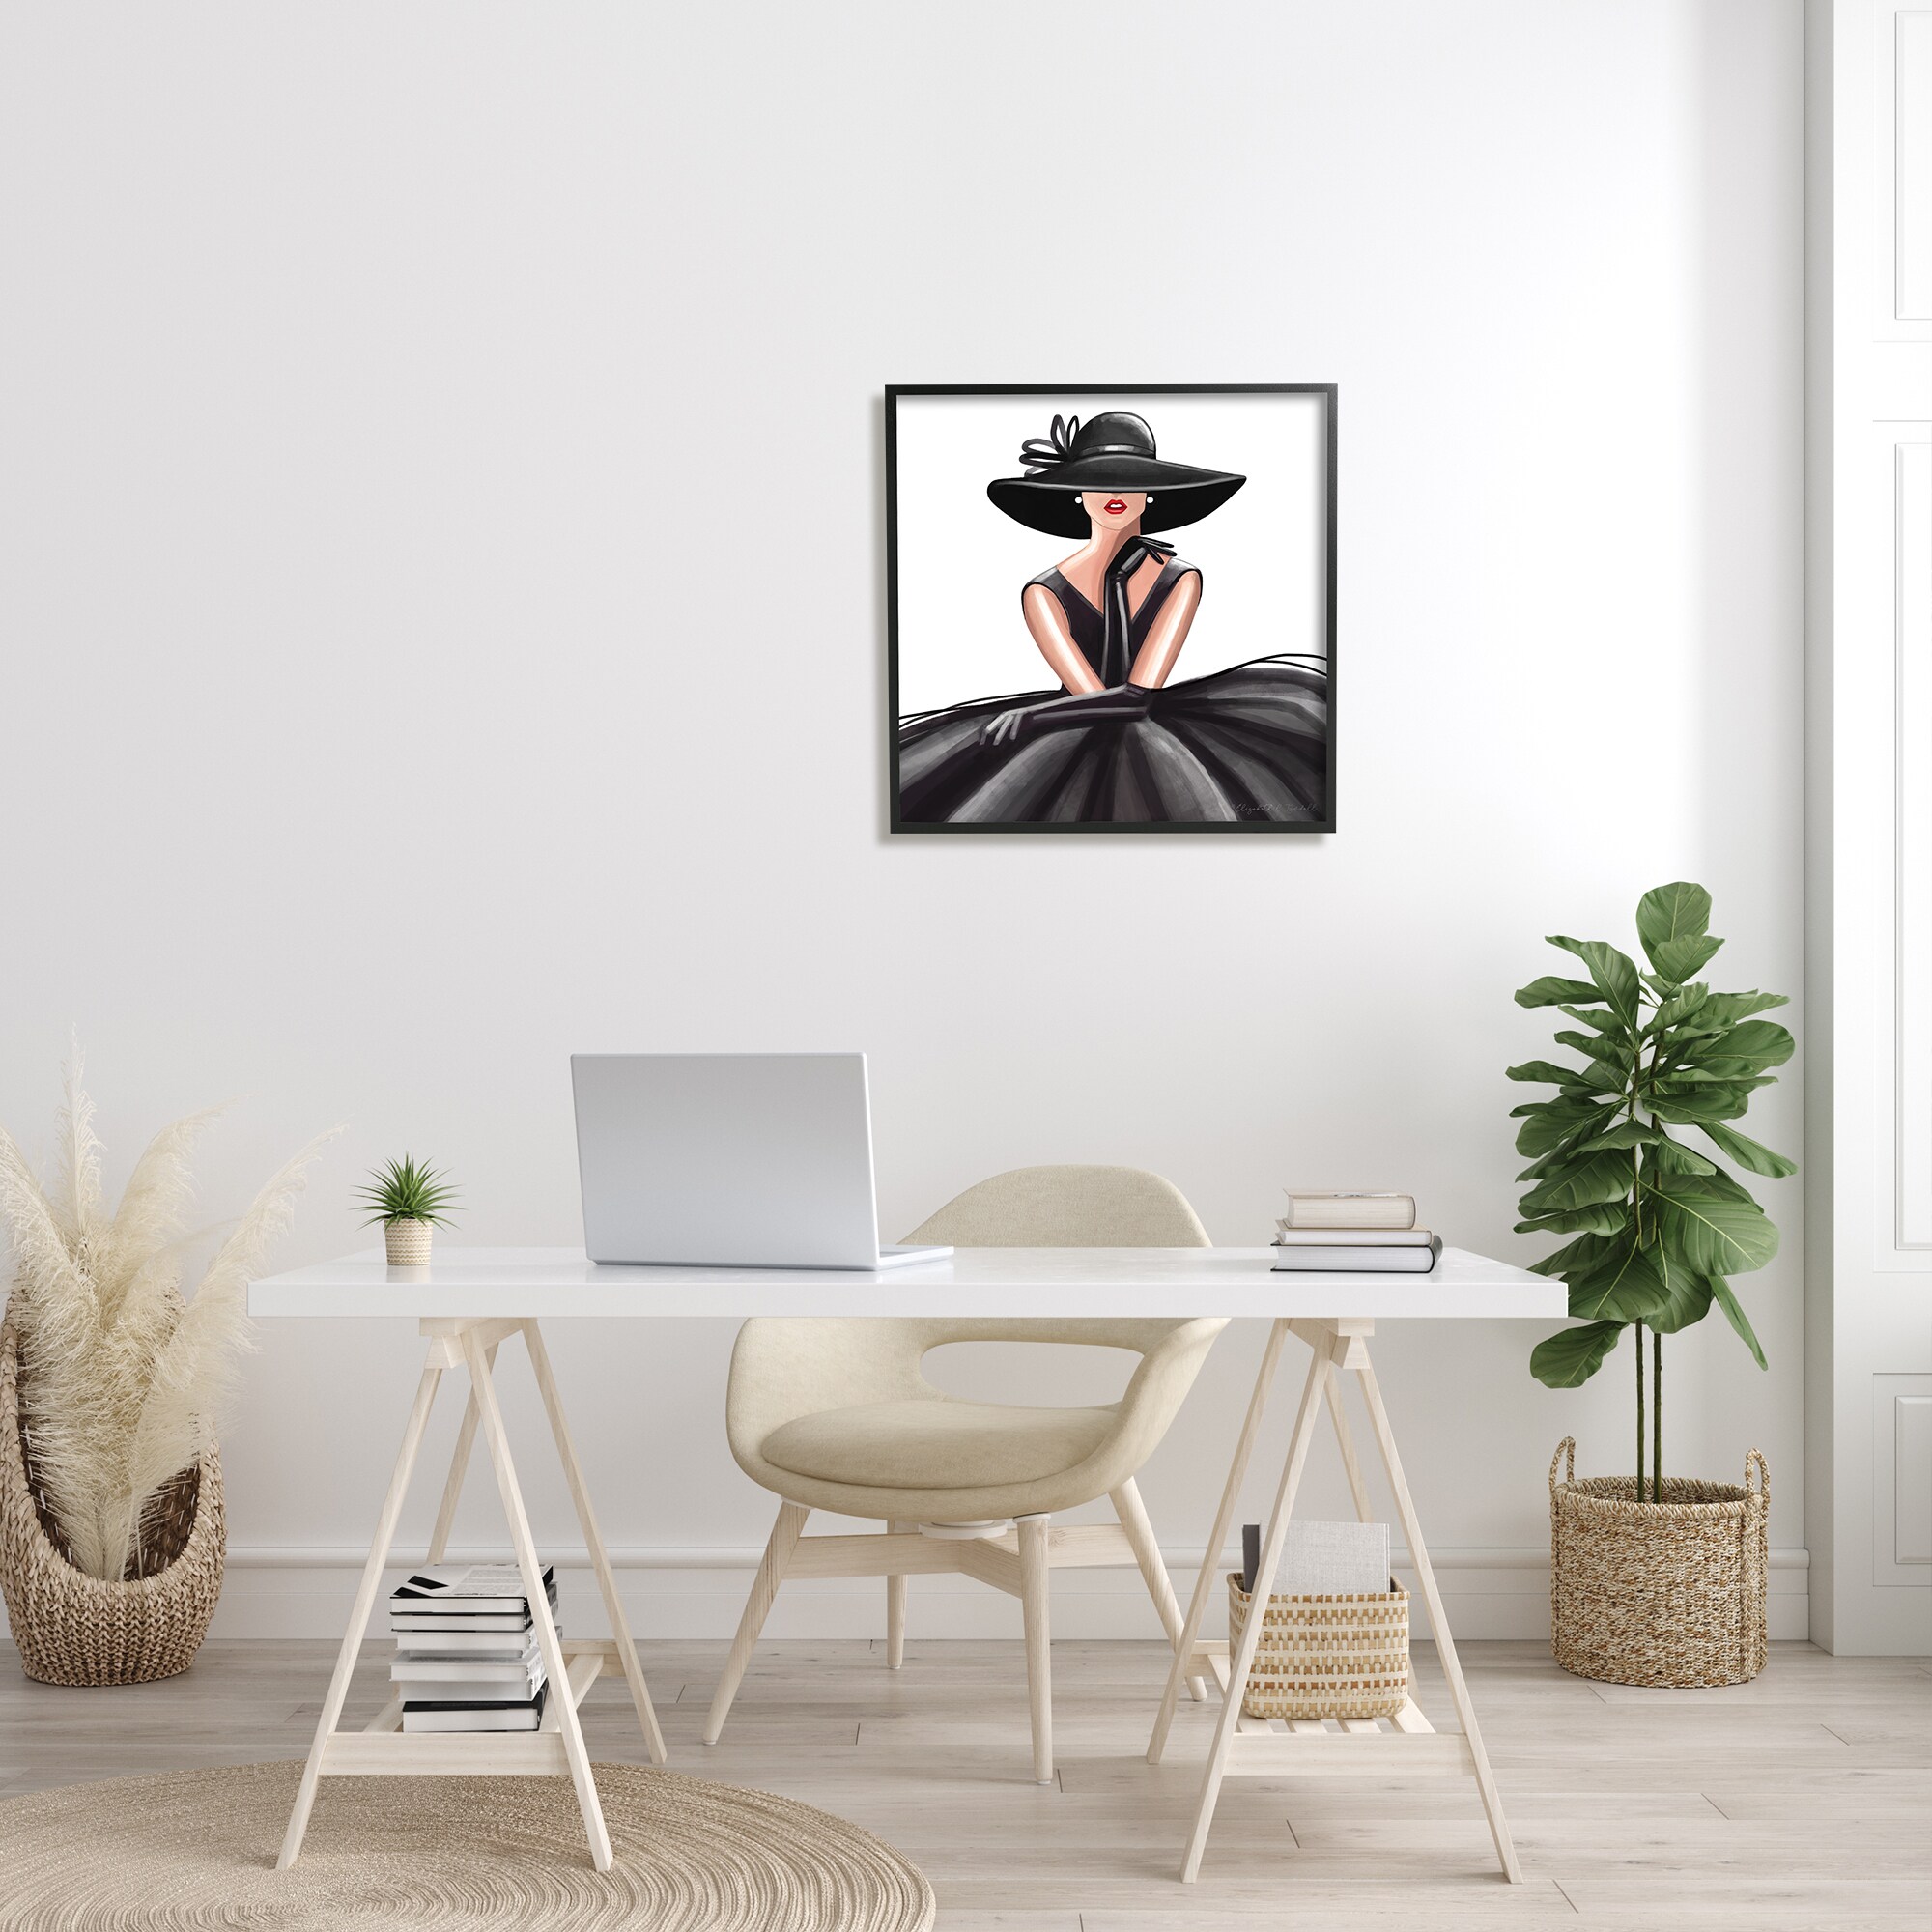 Stupell Industries Elegant Woman's Hand Pose with Fashion Tattoo Black Framed Giclee, 11 x 14